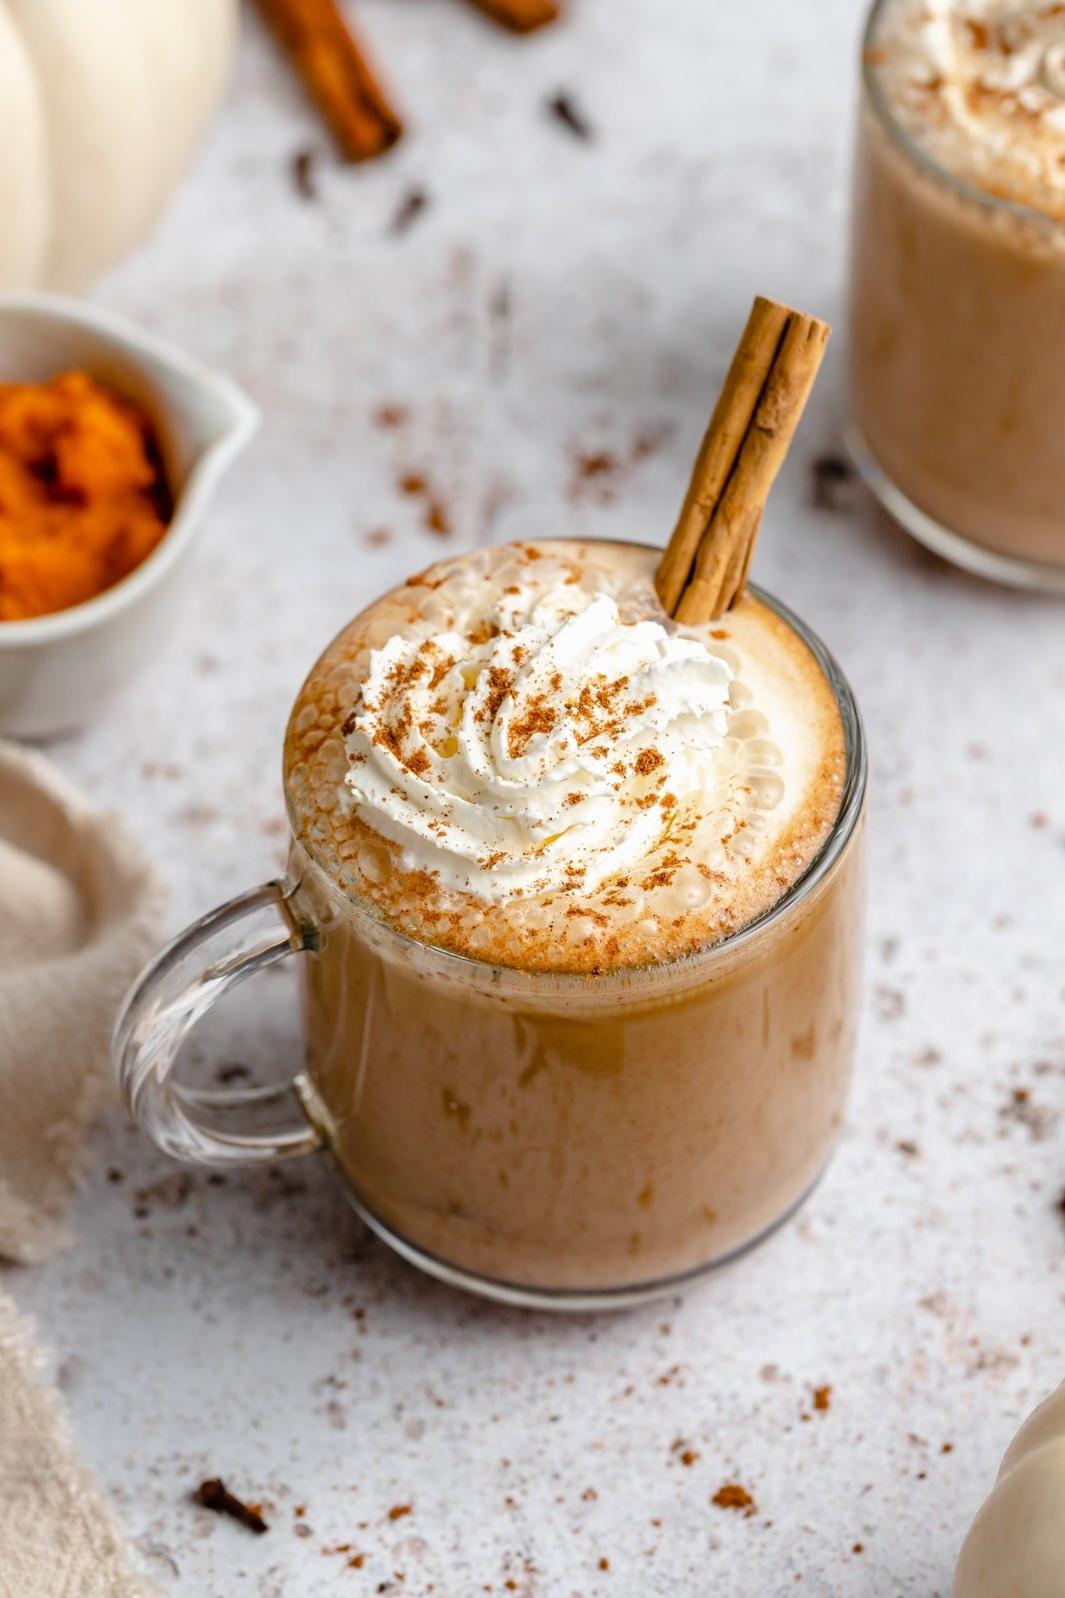  Fall in love with the flavors of pumpkin, cinnamon, nutmeg, and clove.